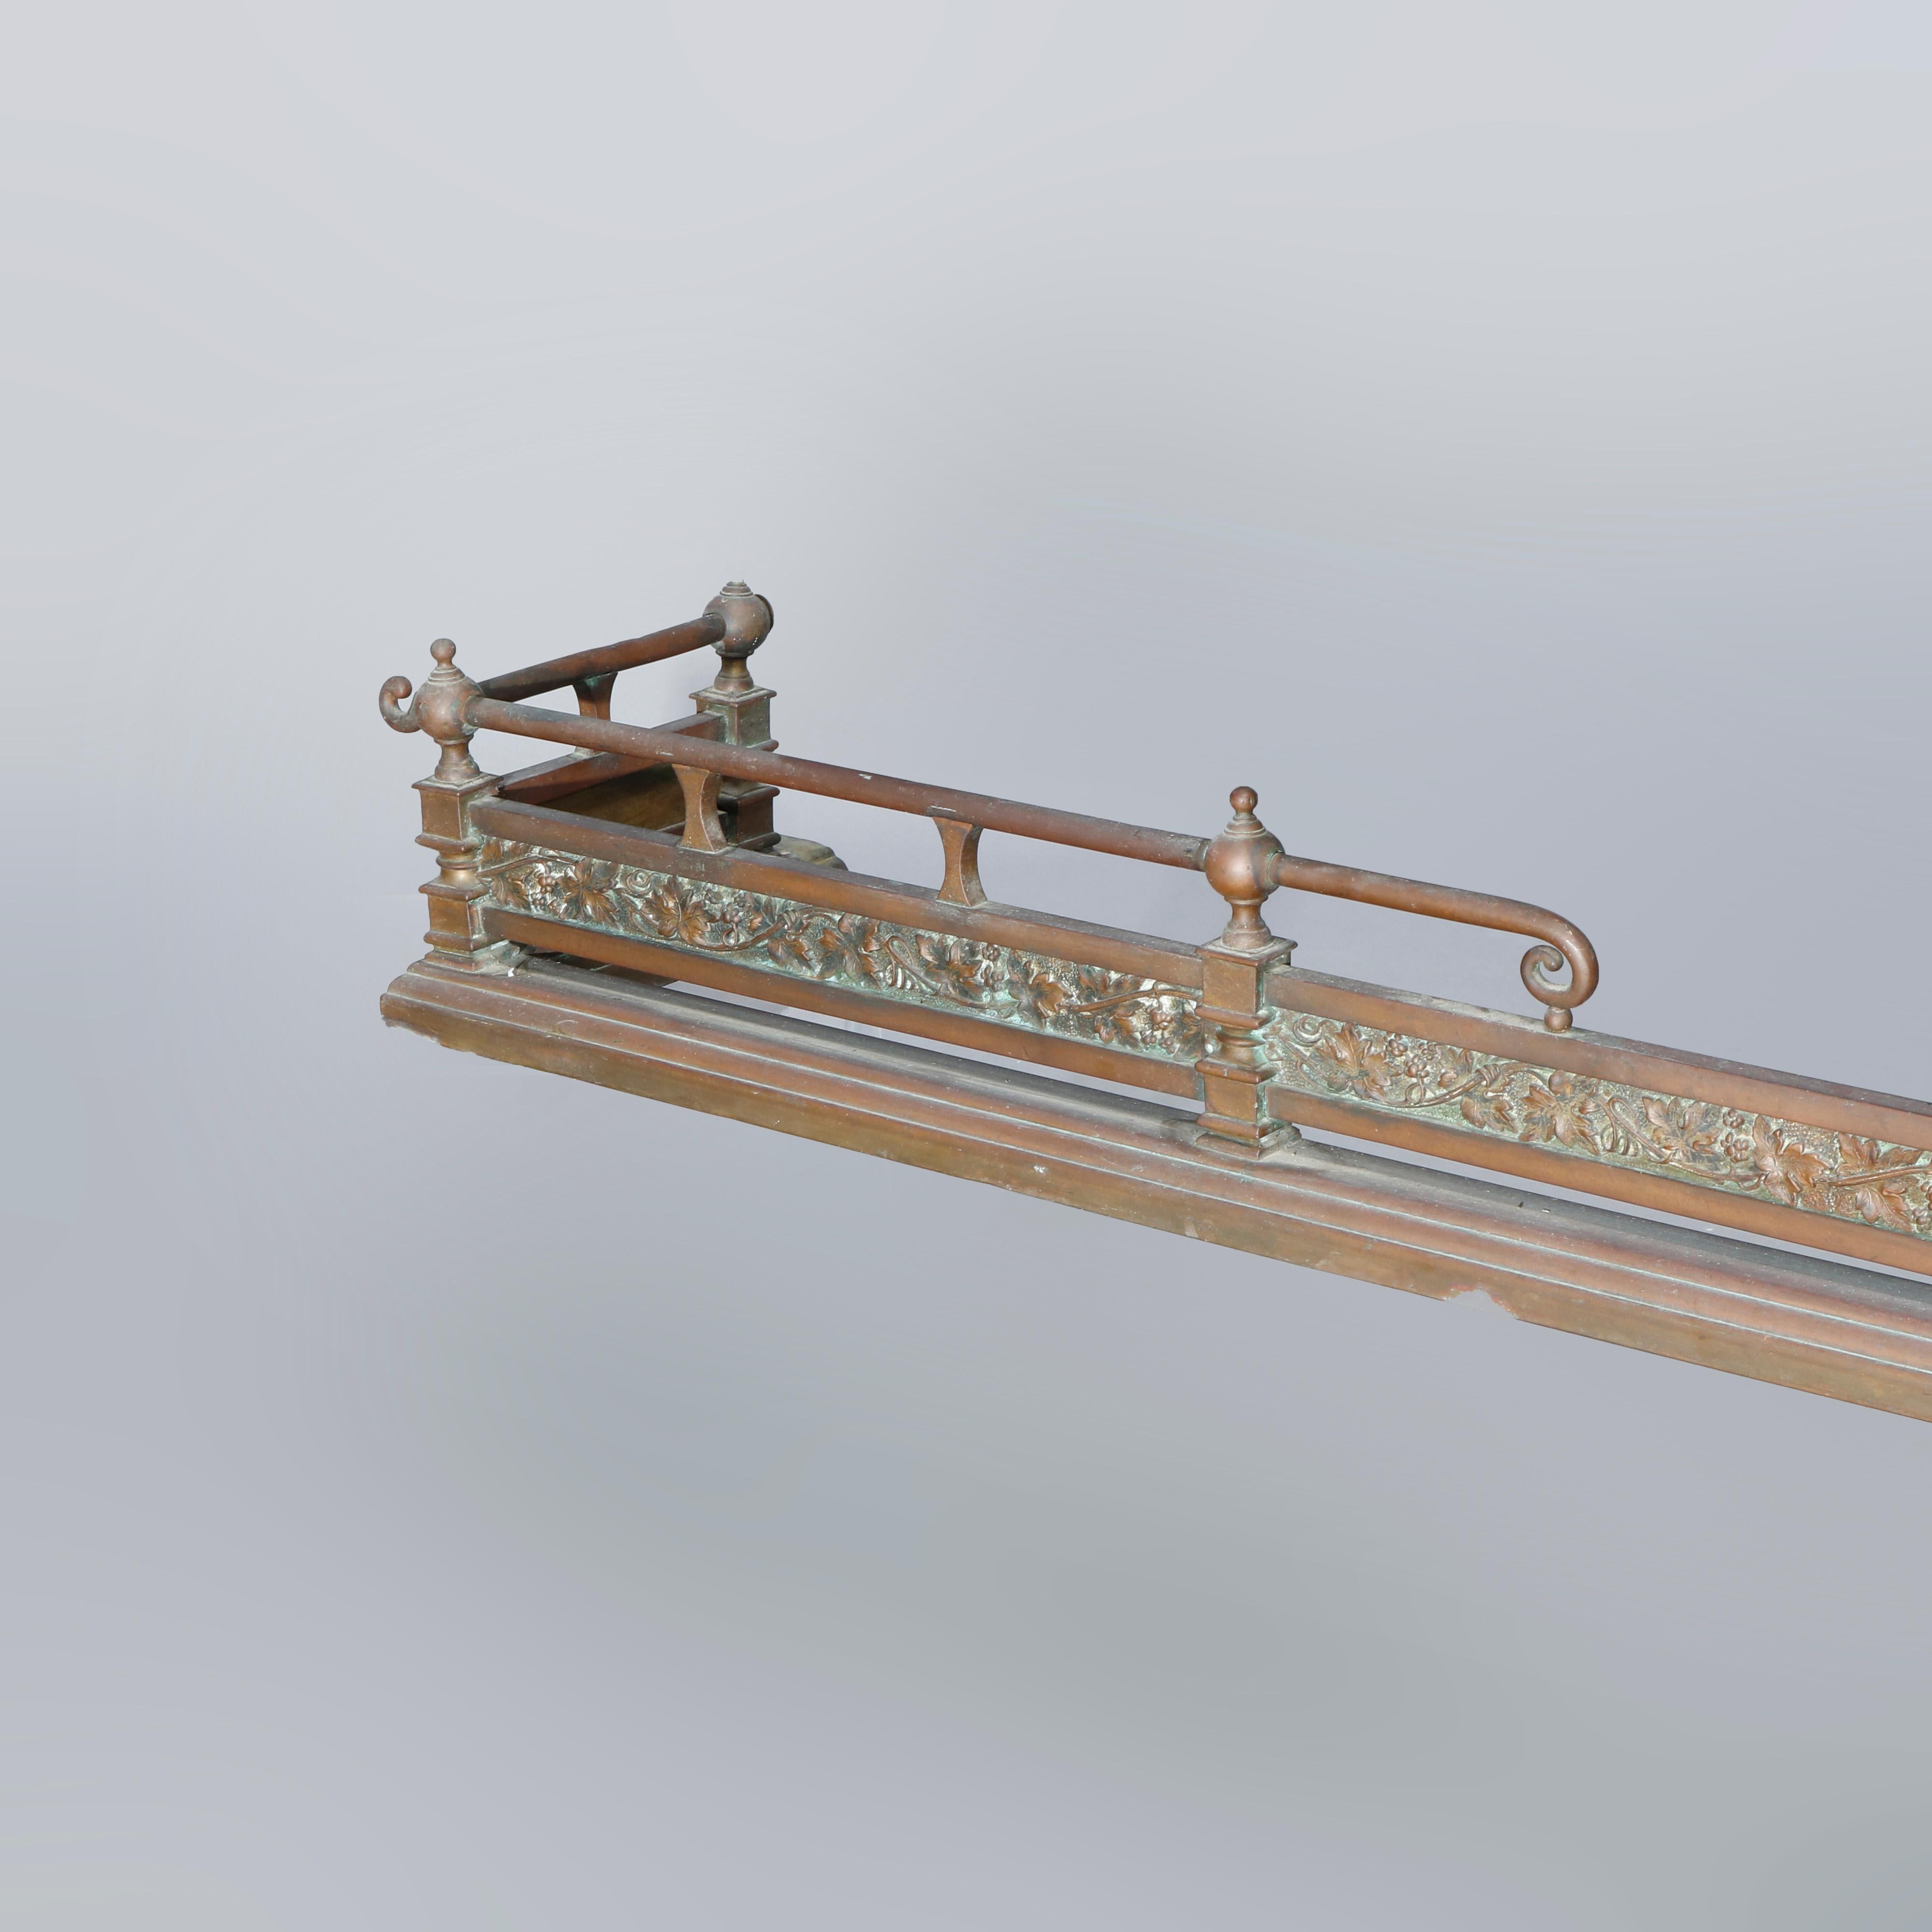 An antique oversized Arts and Crafts fireplace fender offers brass and bronze construction with split spindle rail with scroll elements over plate with vine and leaf in relief and having column form supports, c1900.

Measures: 7